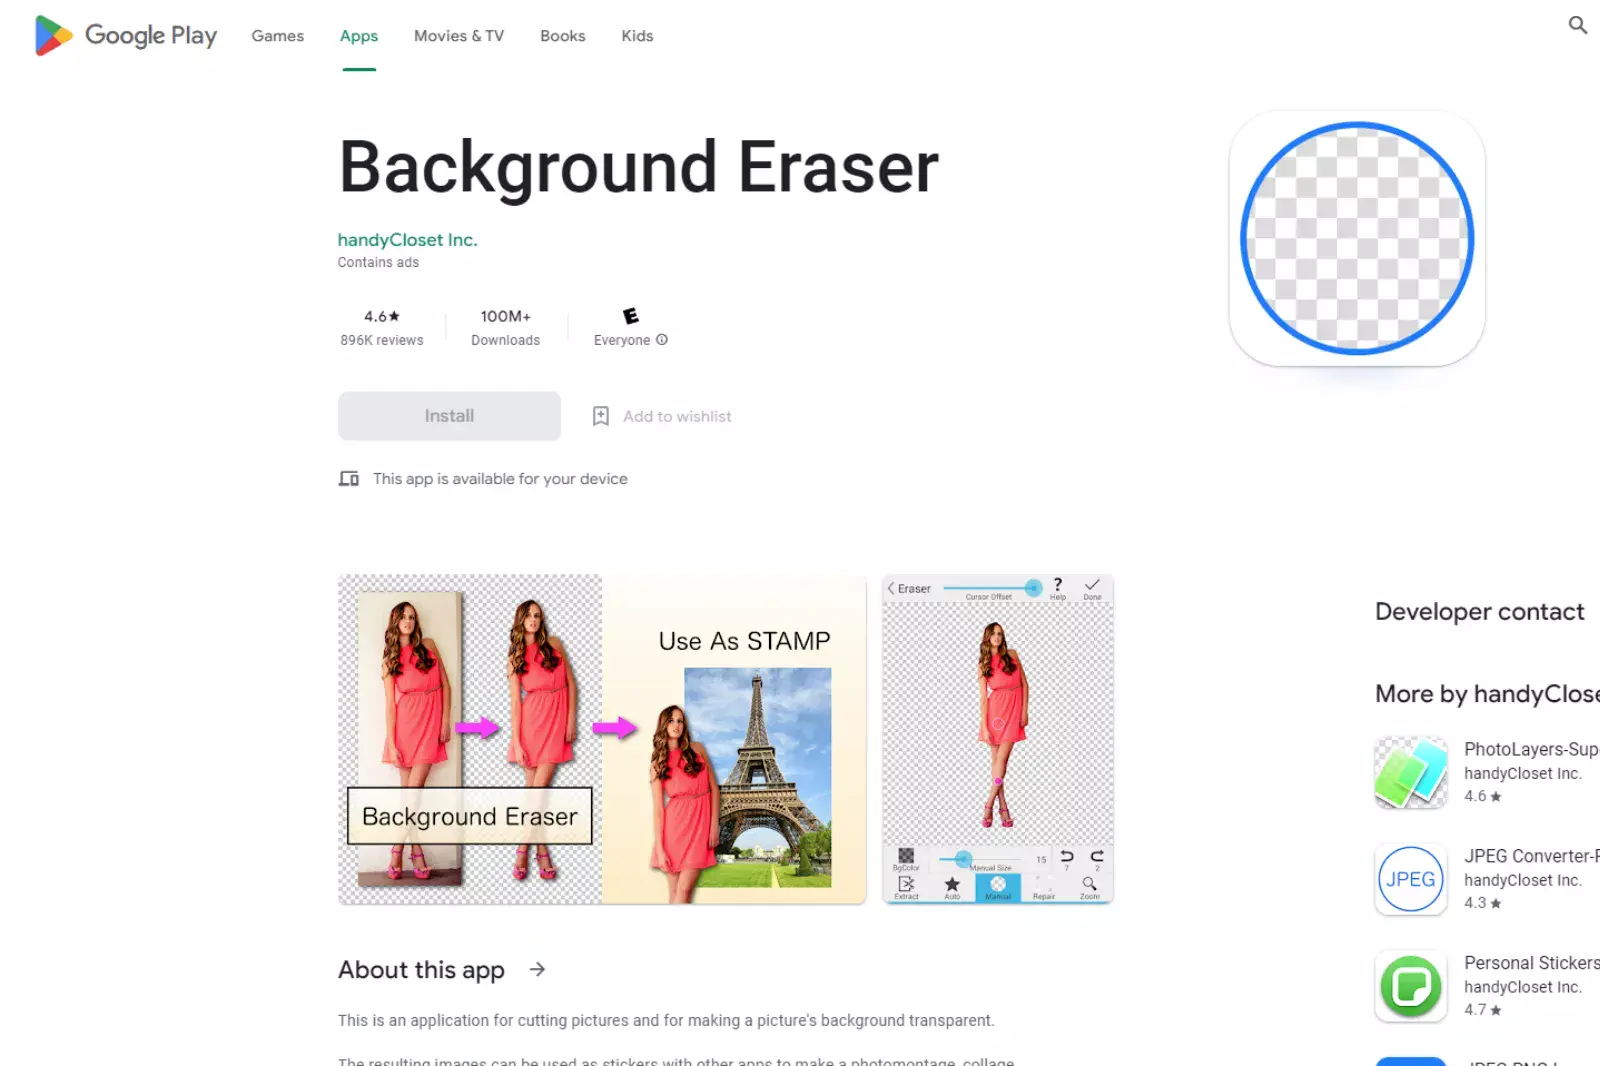 Home Page of Background Eraser by handycloset